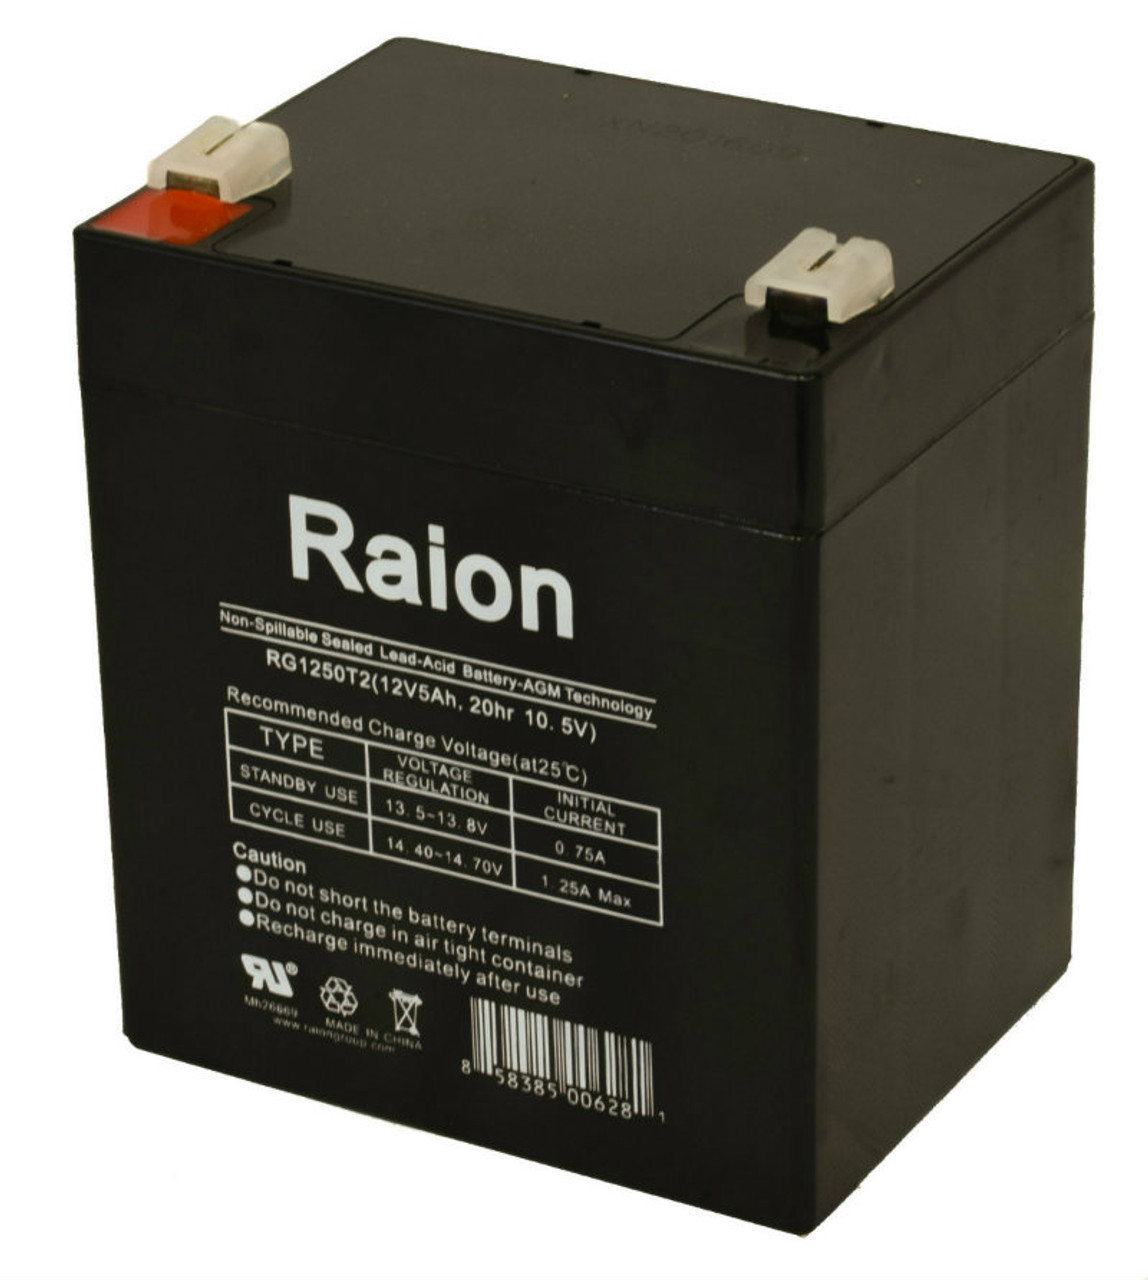 Raion Power RG1250T1 Replacement Battery for KAGE MF12V4Ah